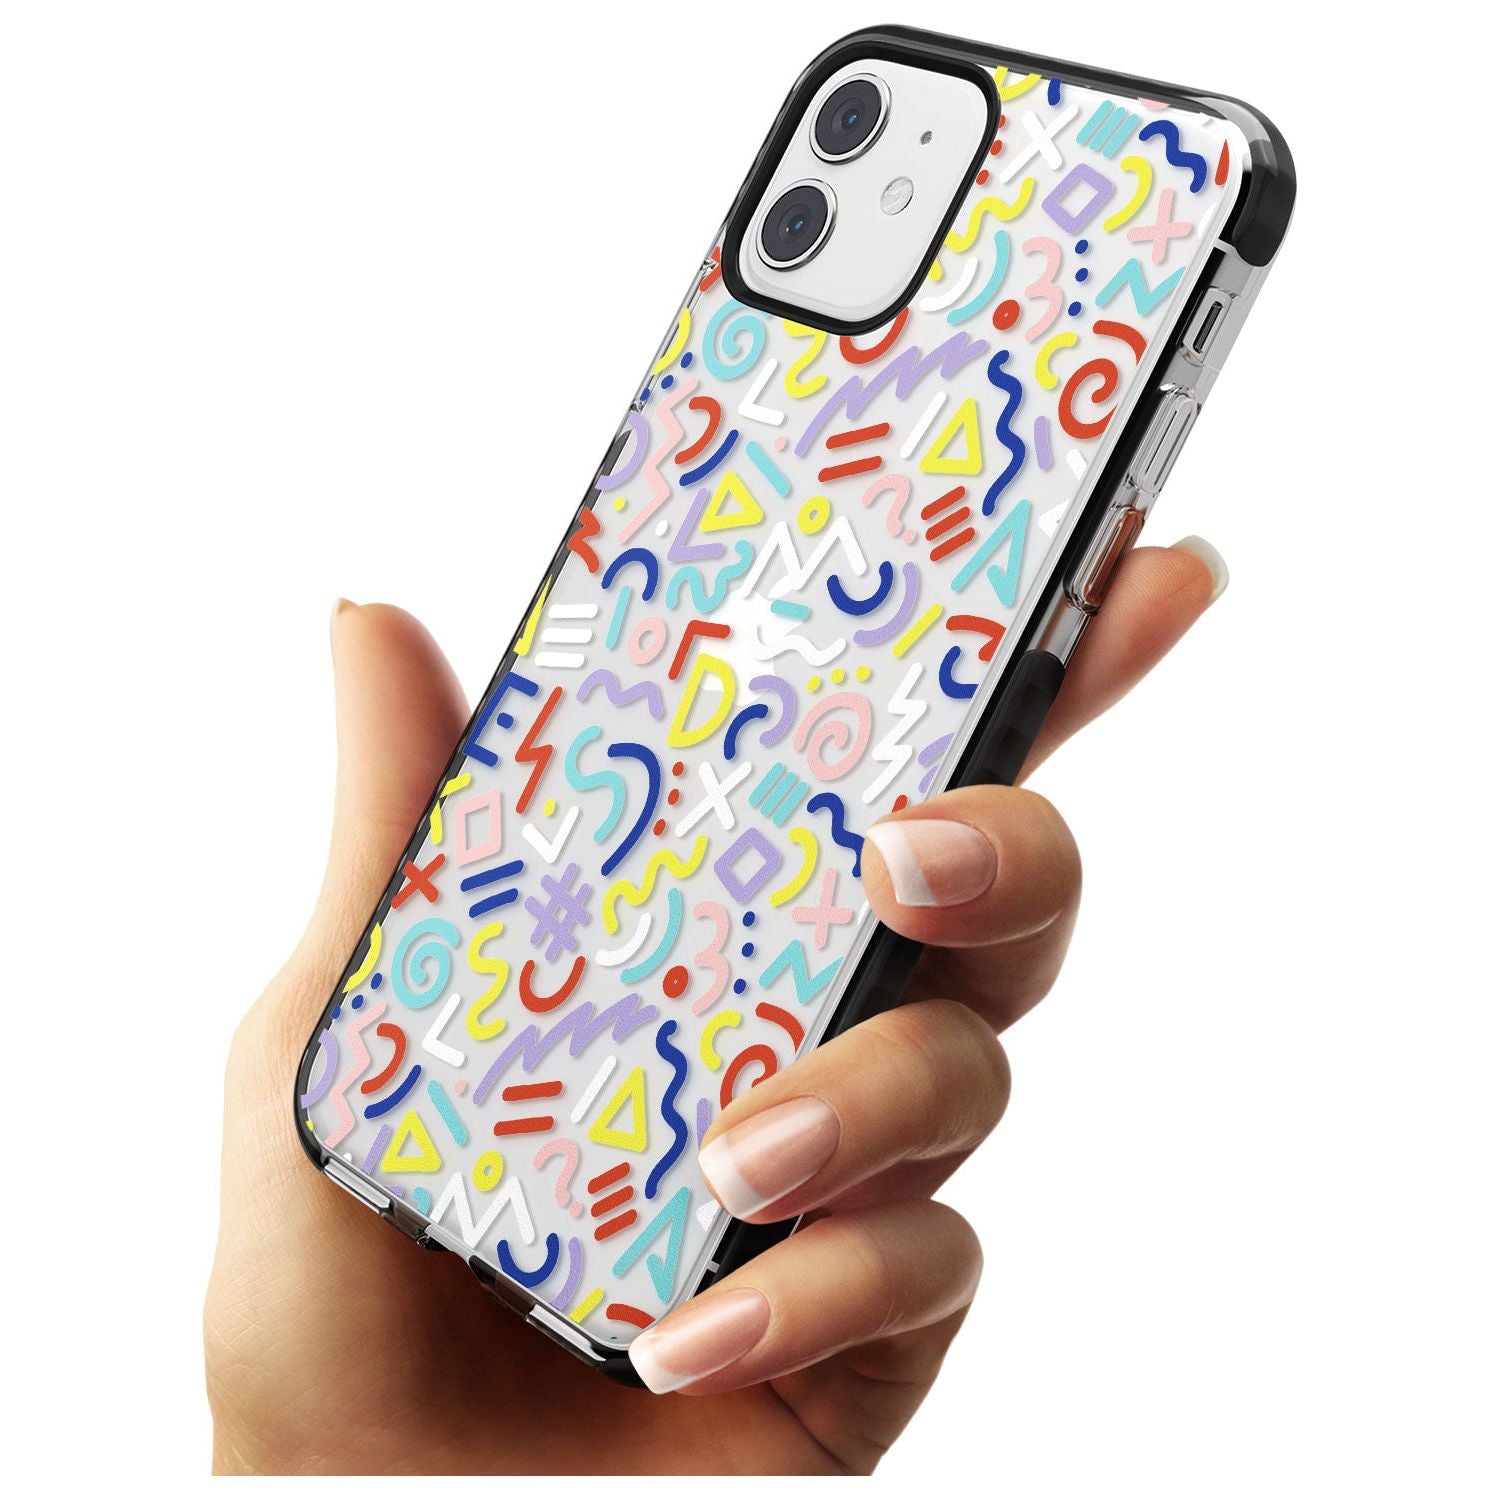 Colourful Mixed Shapes Retro Pattern Design Black Impact Phone Case for iPhone 11